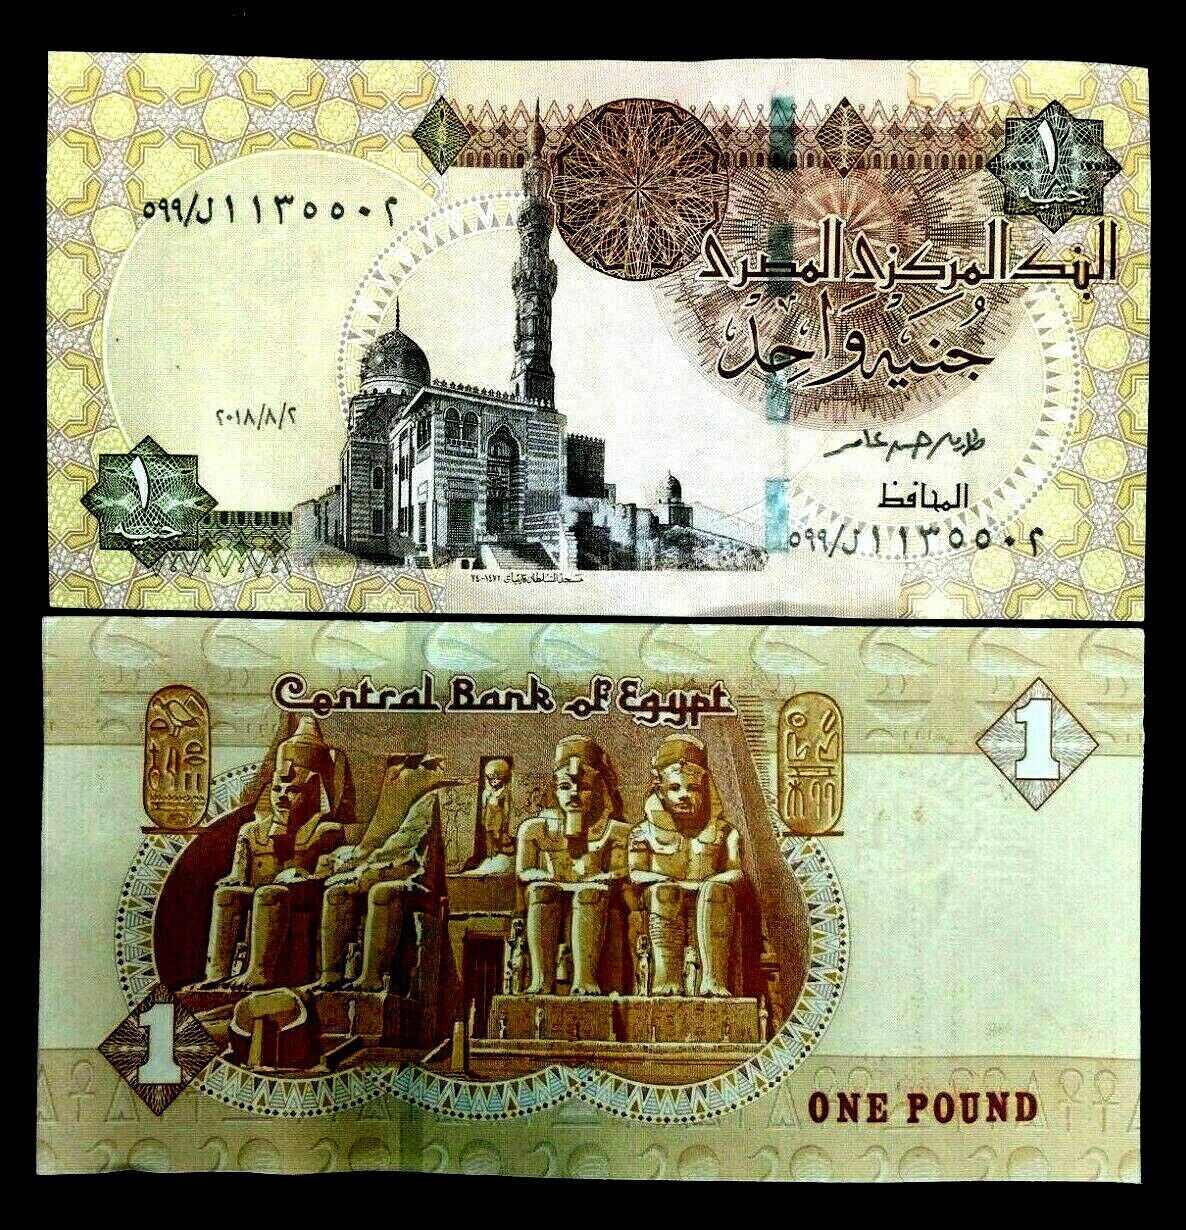 Egypt 1 Pound Banknote World Paper Money Unc Currency Bill Note